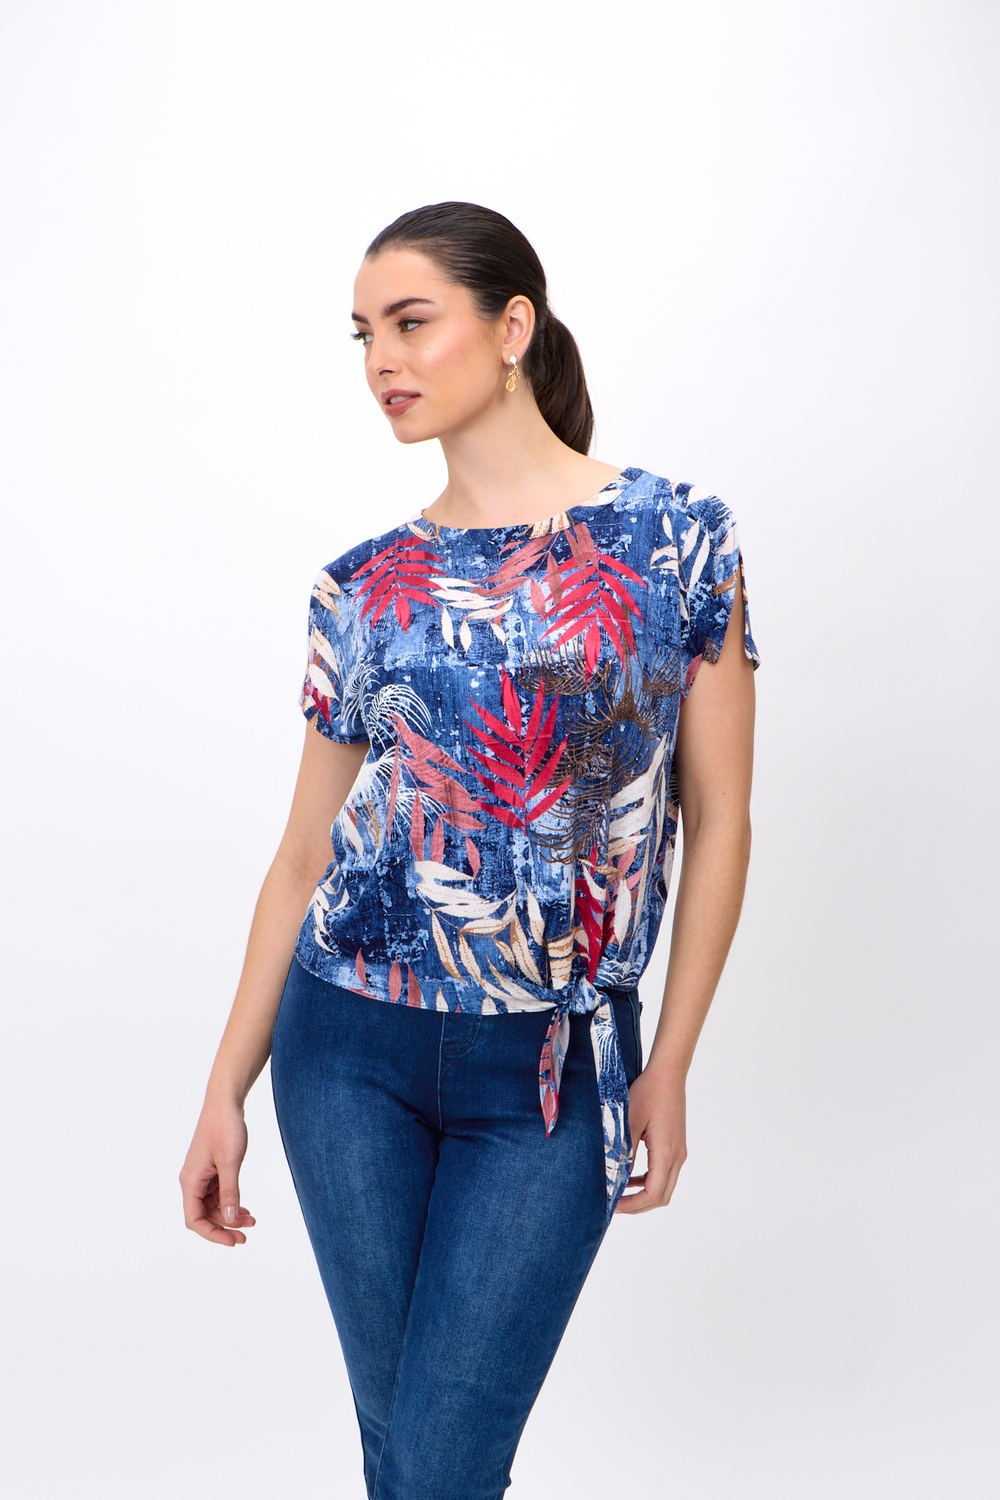 Tropical Pattern Tie Knot Top Style 6281241239. Blue/pink